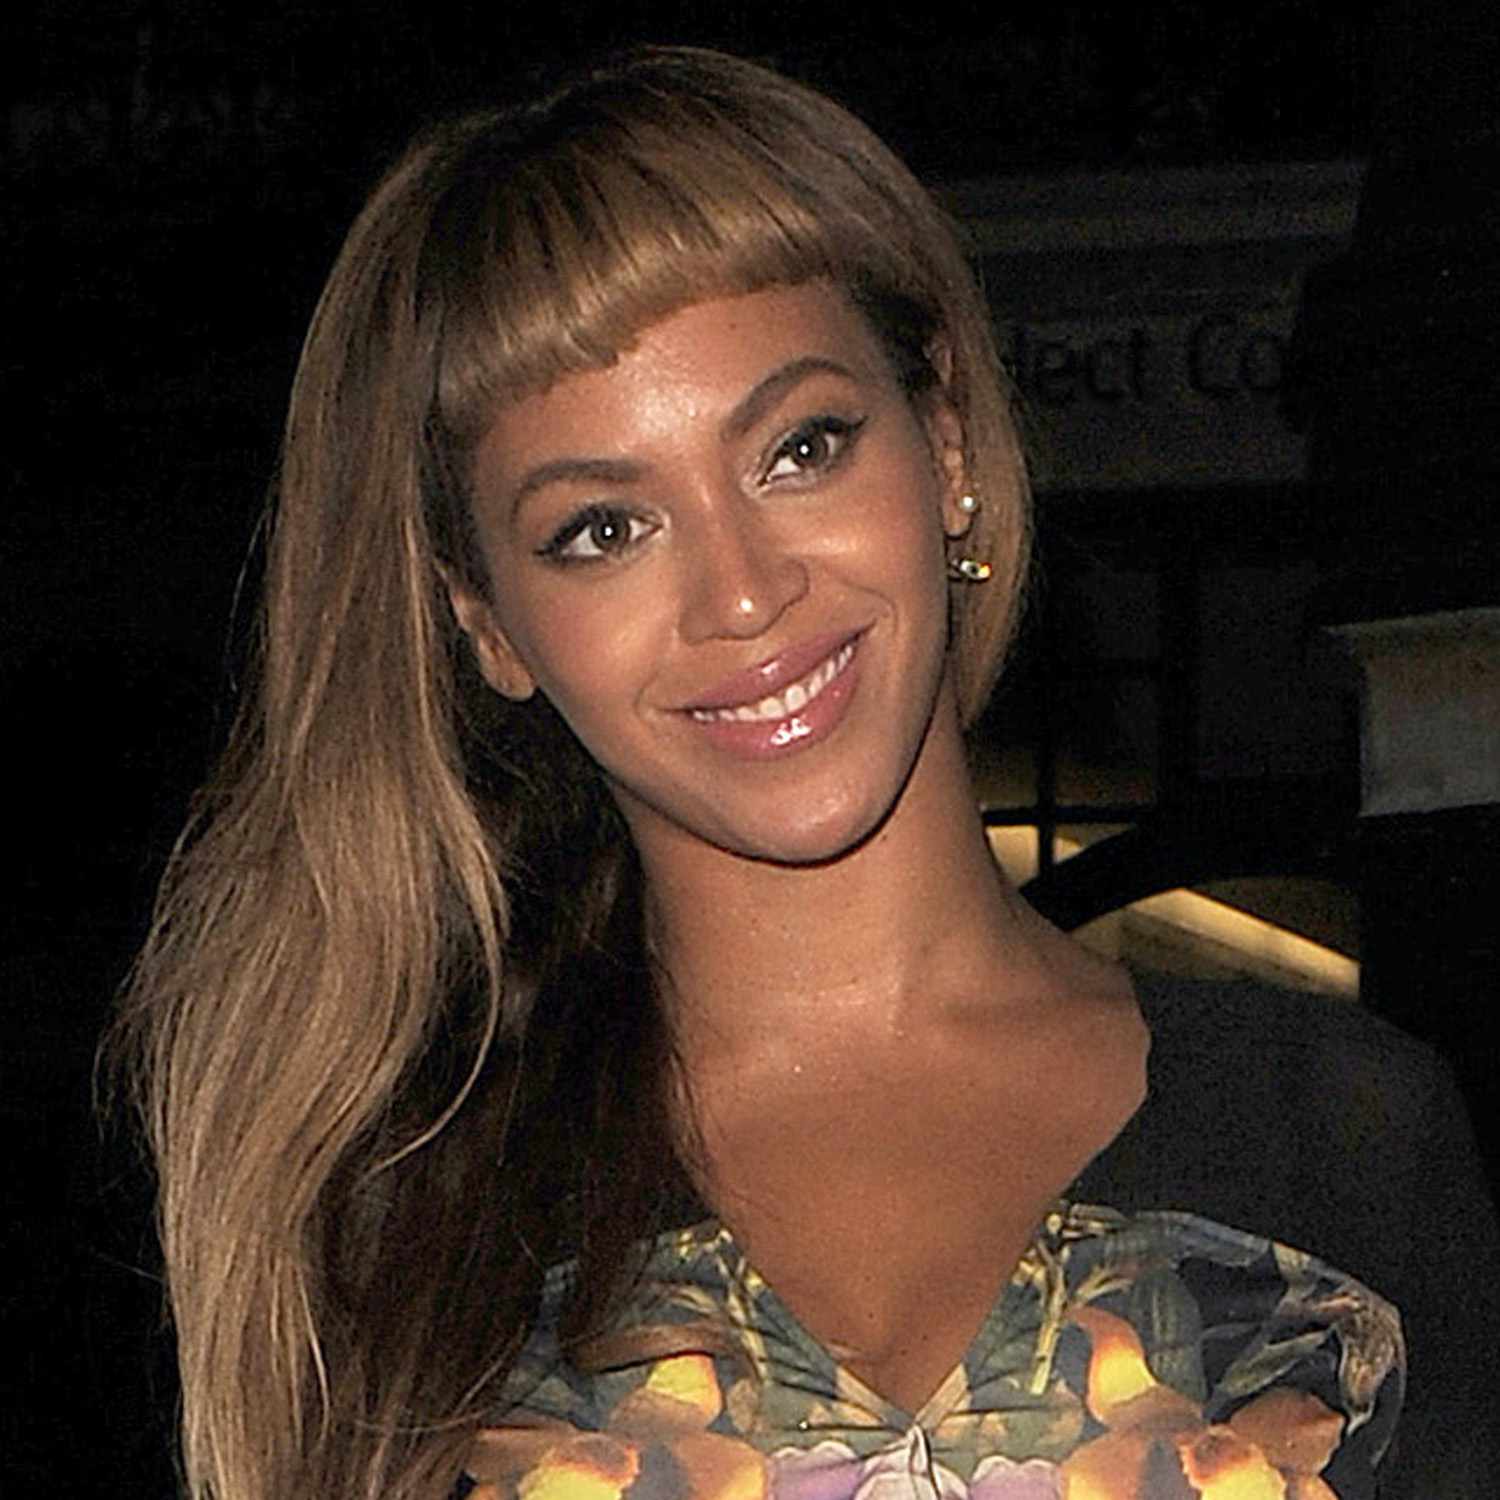 Beyonce wears long, tousled hair with baby bangs